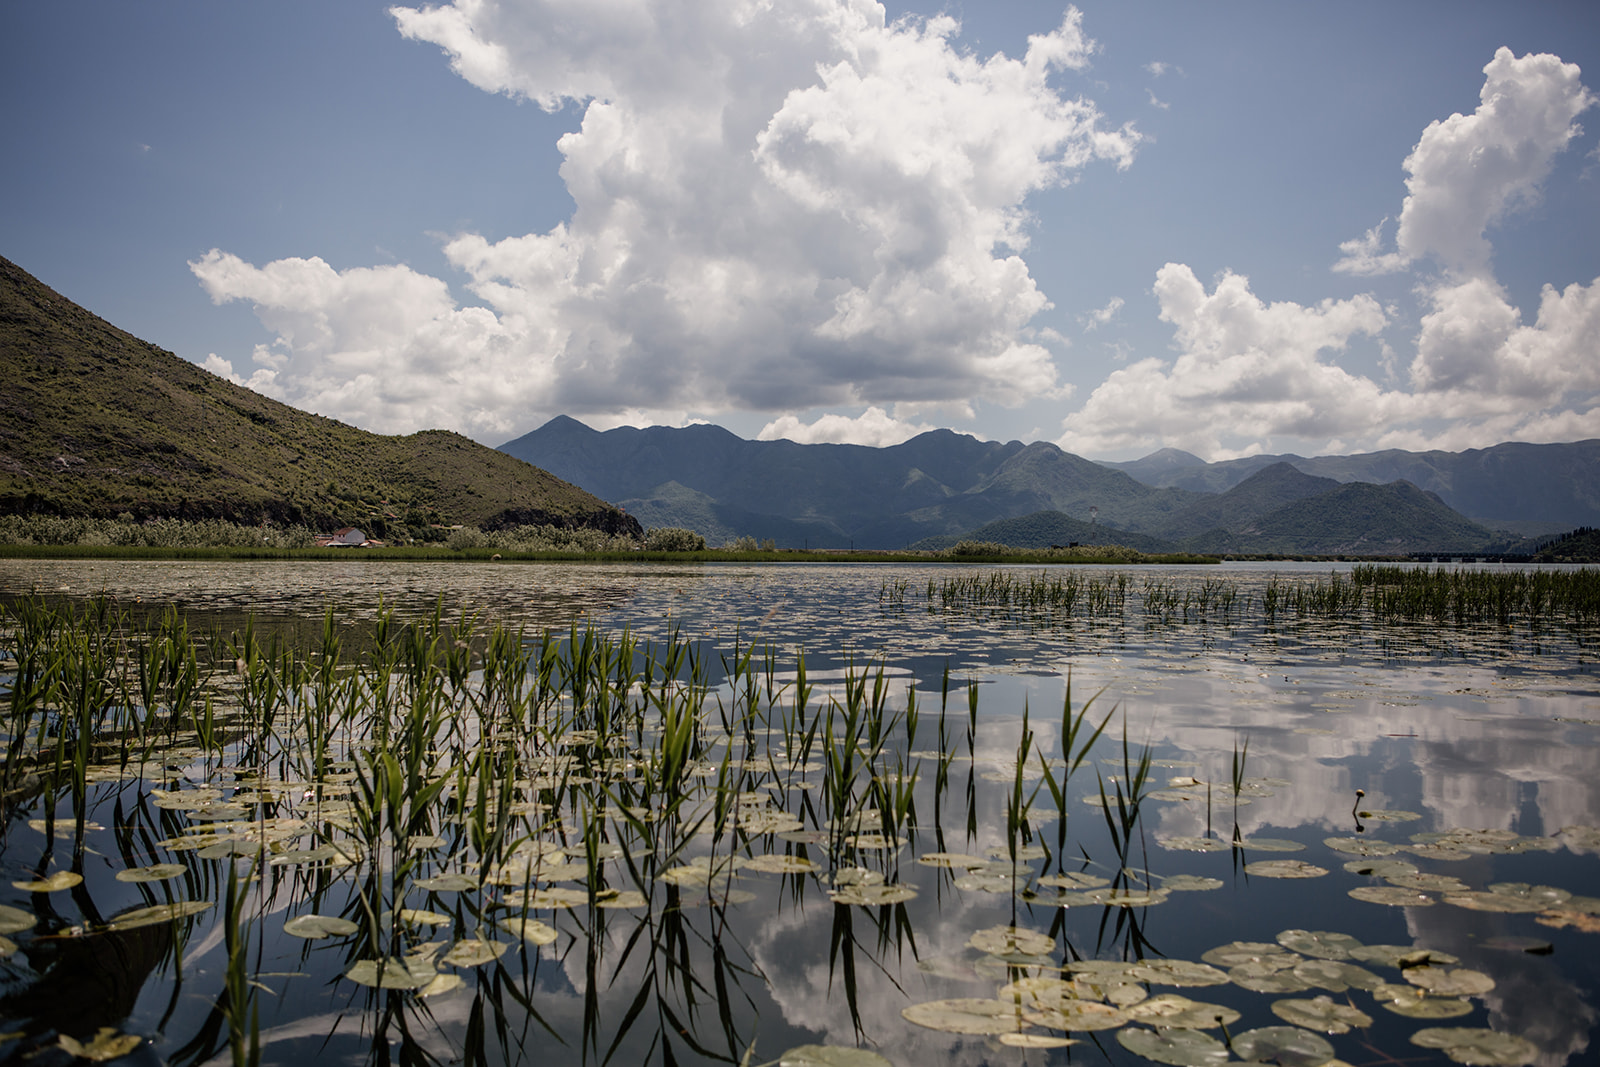 lake skadar lilies and mountains in distance yoga holiday montenegro